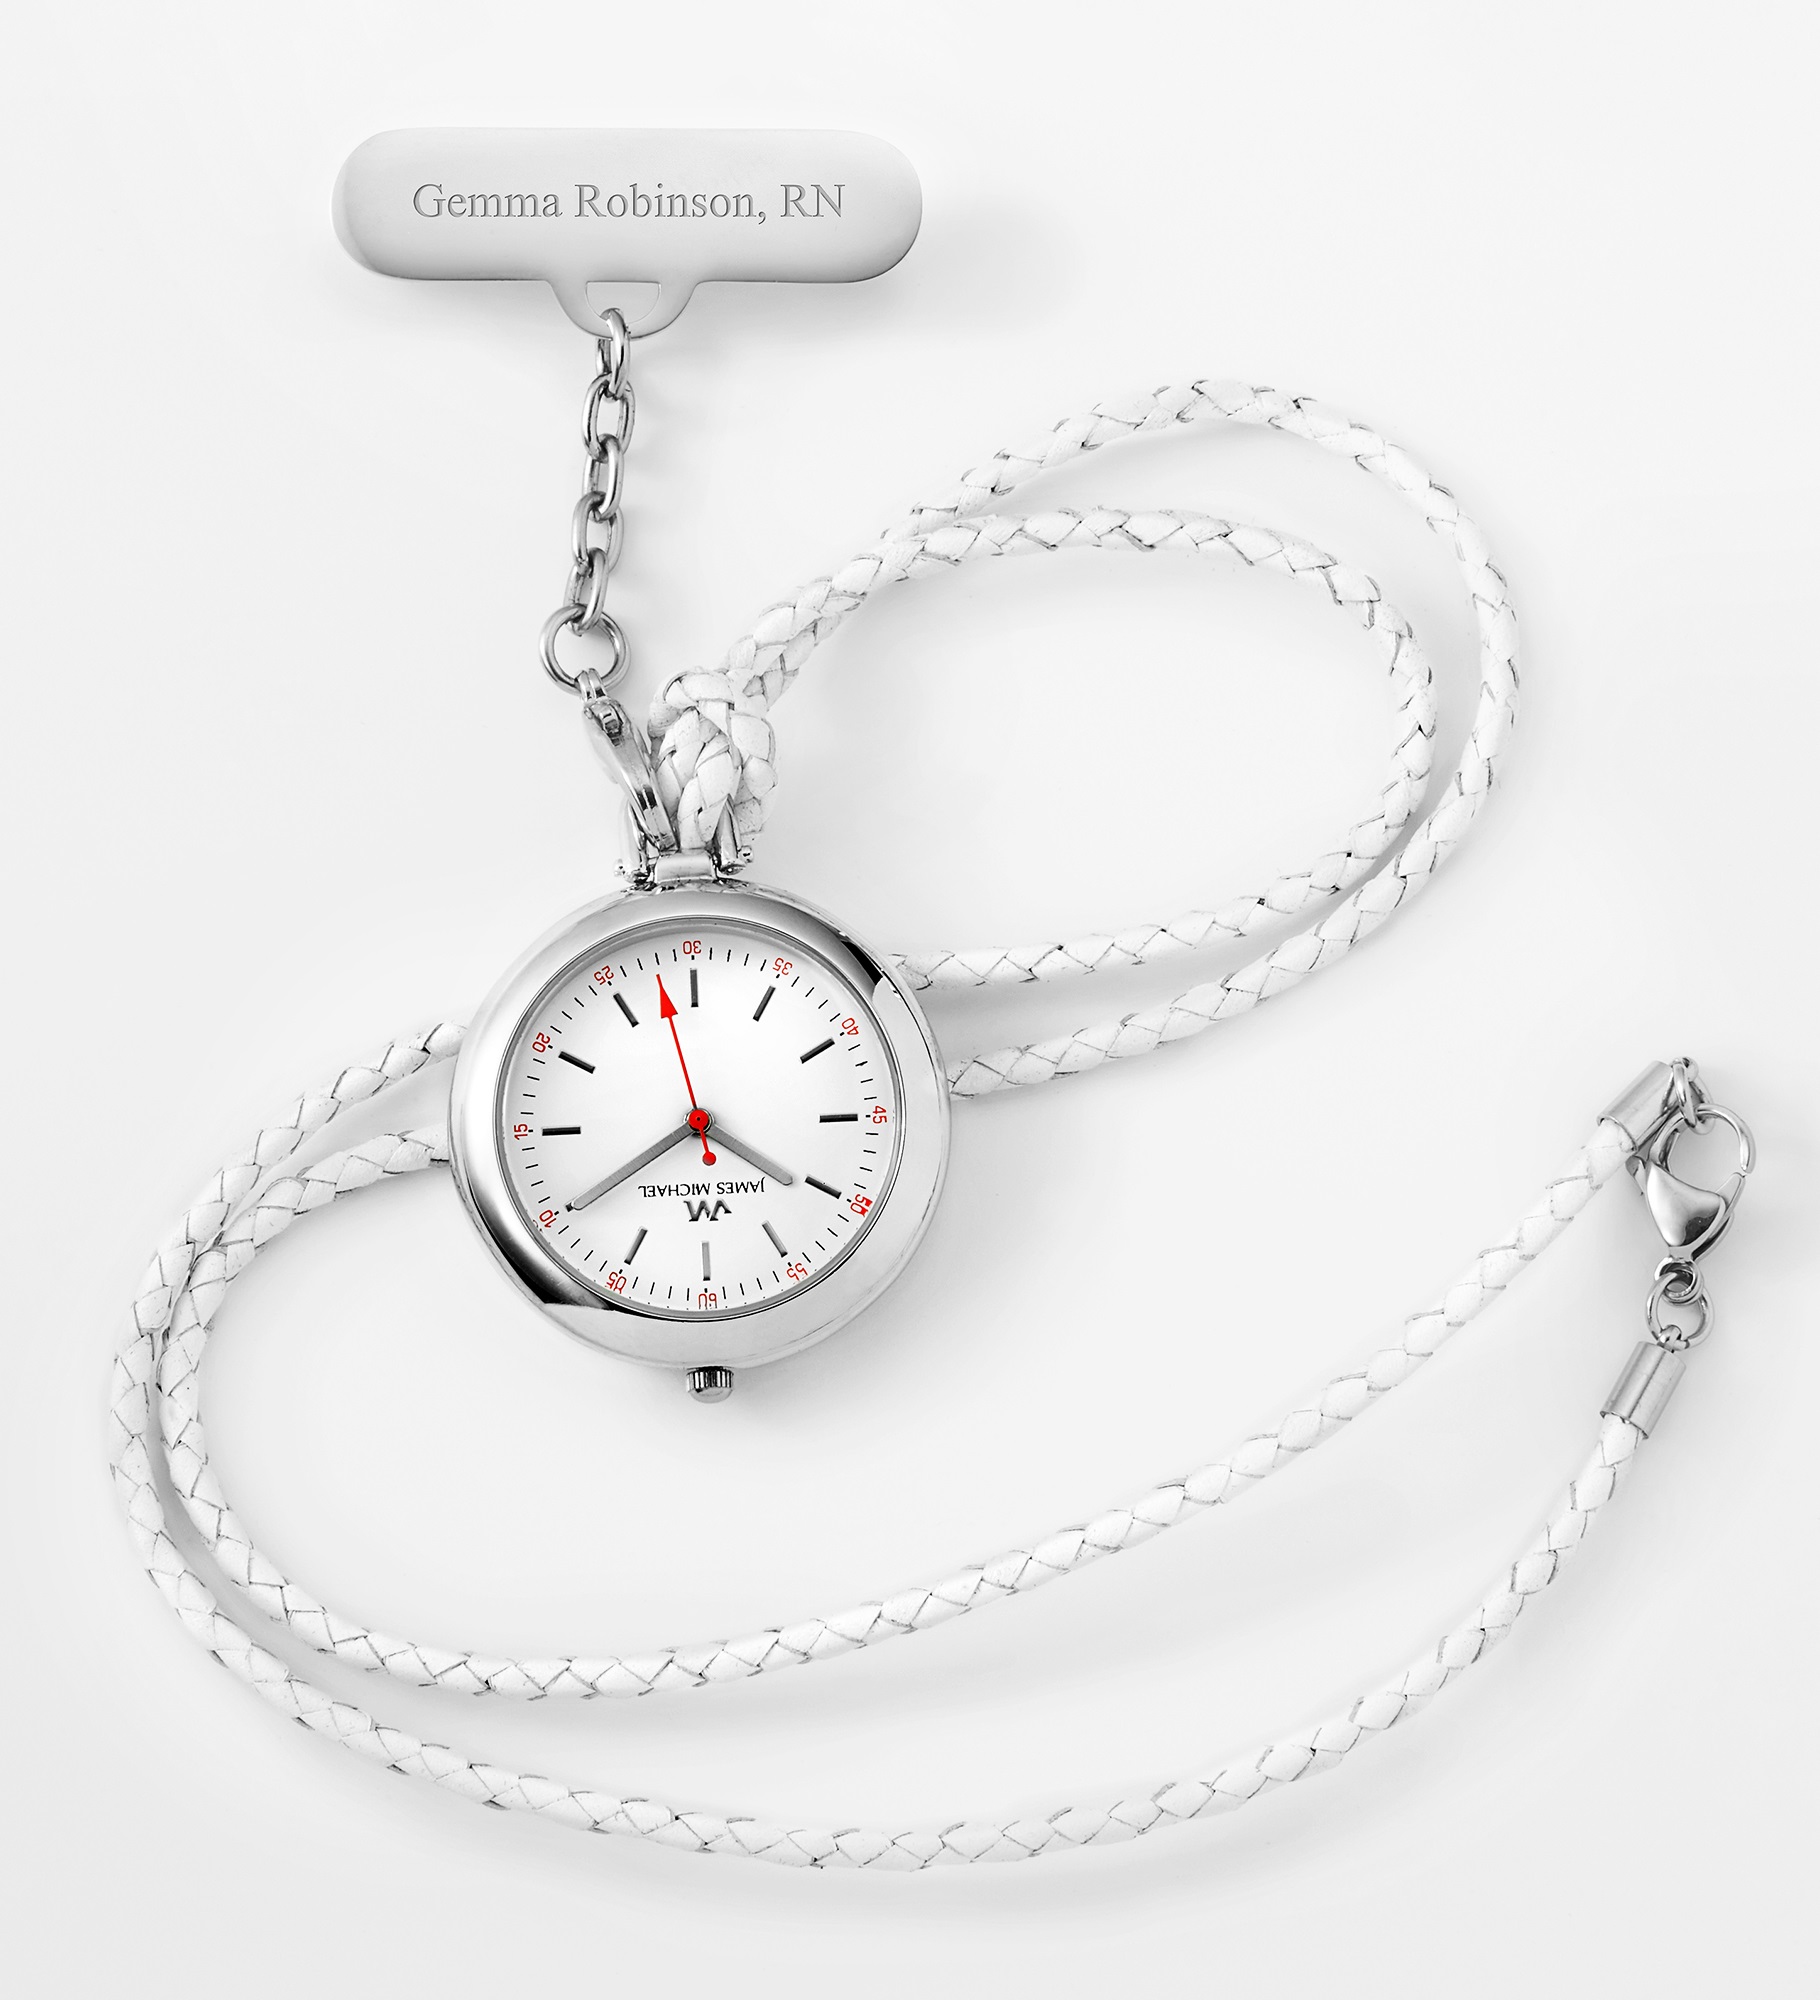 Engraved Nurse Pin and Necklace Watch with Keepsake Box